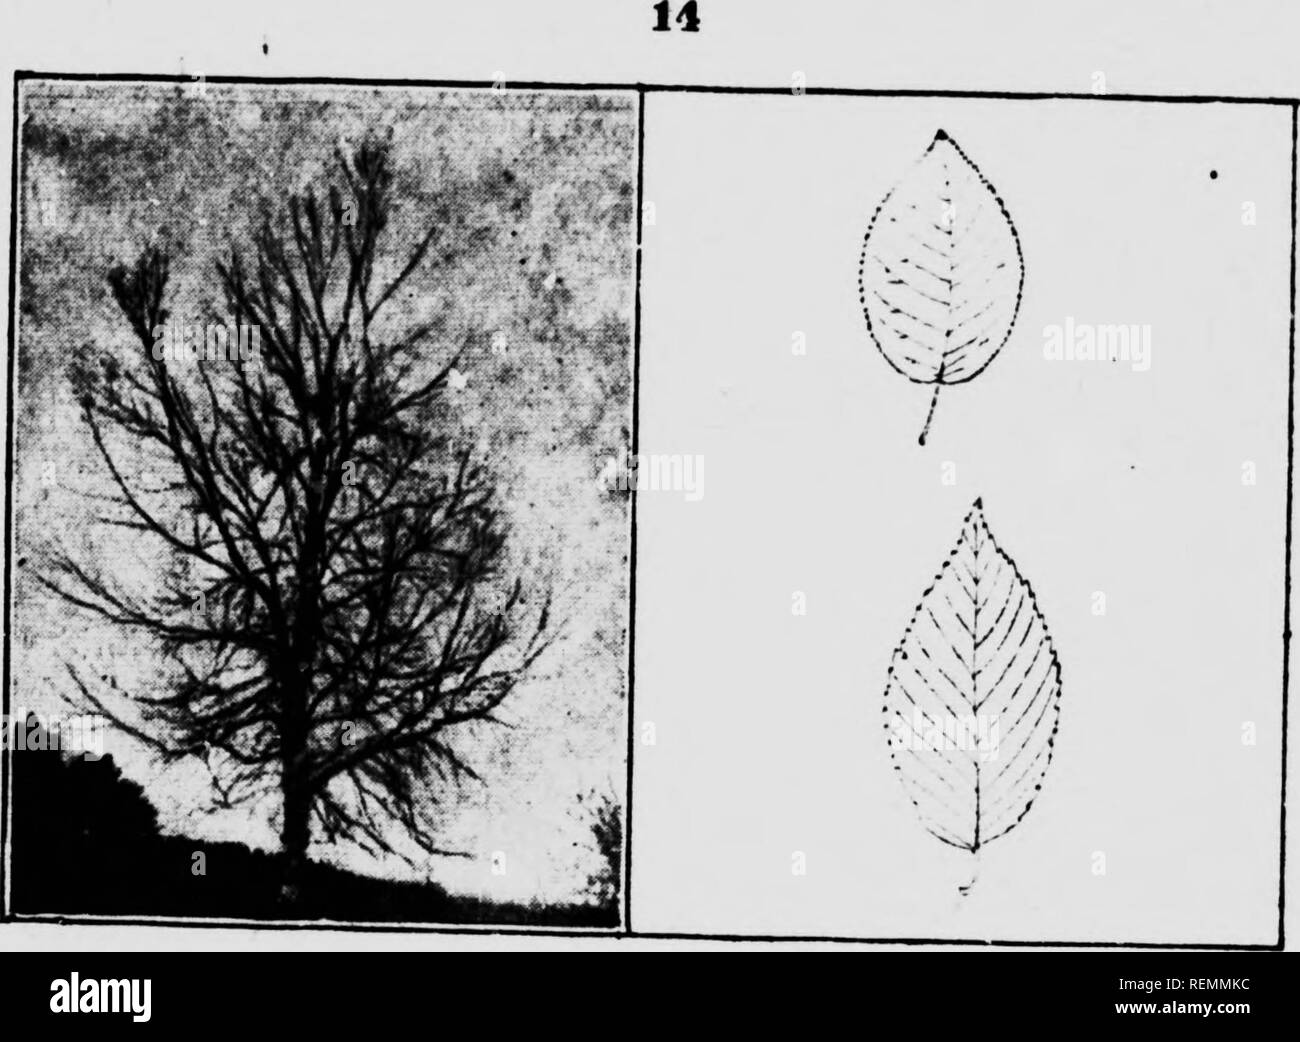 . Twenty Canadian forest trees [microform]. Arbres; Trees. Â«^v.i 1 i?- ^&quot;J** â ^'â¢ee Leaf. vehicles. For these purposes the yellow birch is Inlf ^- ^^I' .^^''^^ P^Pe*&quot; *&gt;*'-ch is a softer 7Â°Â°^ yellow birch and it is k&quot;!^Â®? &quot;P^Â®^^- '^^'^ ^ar*^ of the paper or canoe birch is used to make bark canoes. The graceful shape of the tree and its light colored rawL&quot;&quot; * 'ftvorite in planting In parks and 11.âTHE POPL.R. liatin name, Popalns. The poplars (and the spruces) are the most T-idely distributed trees in Canada. The poplar grows all along the southern edge  Stock Photo